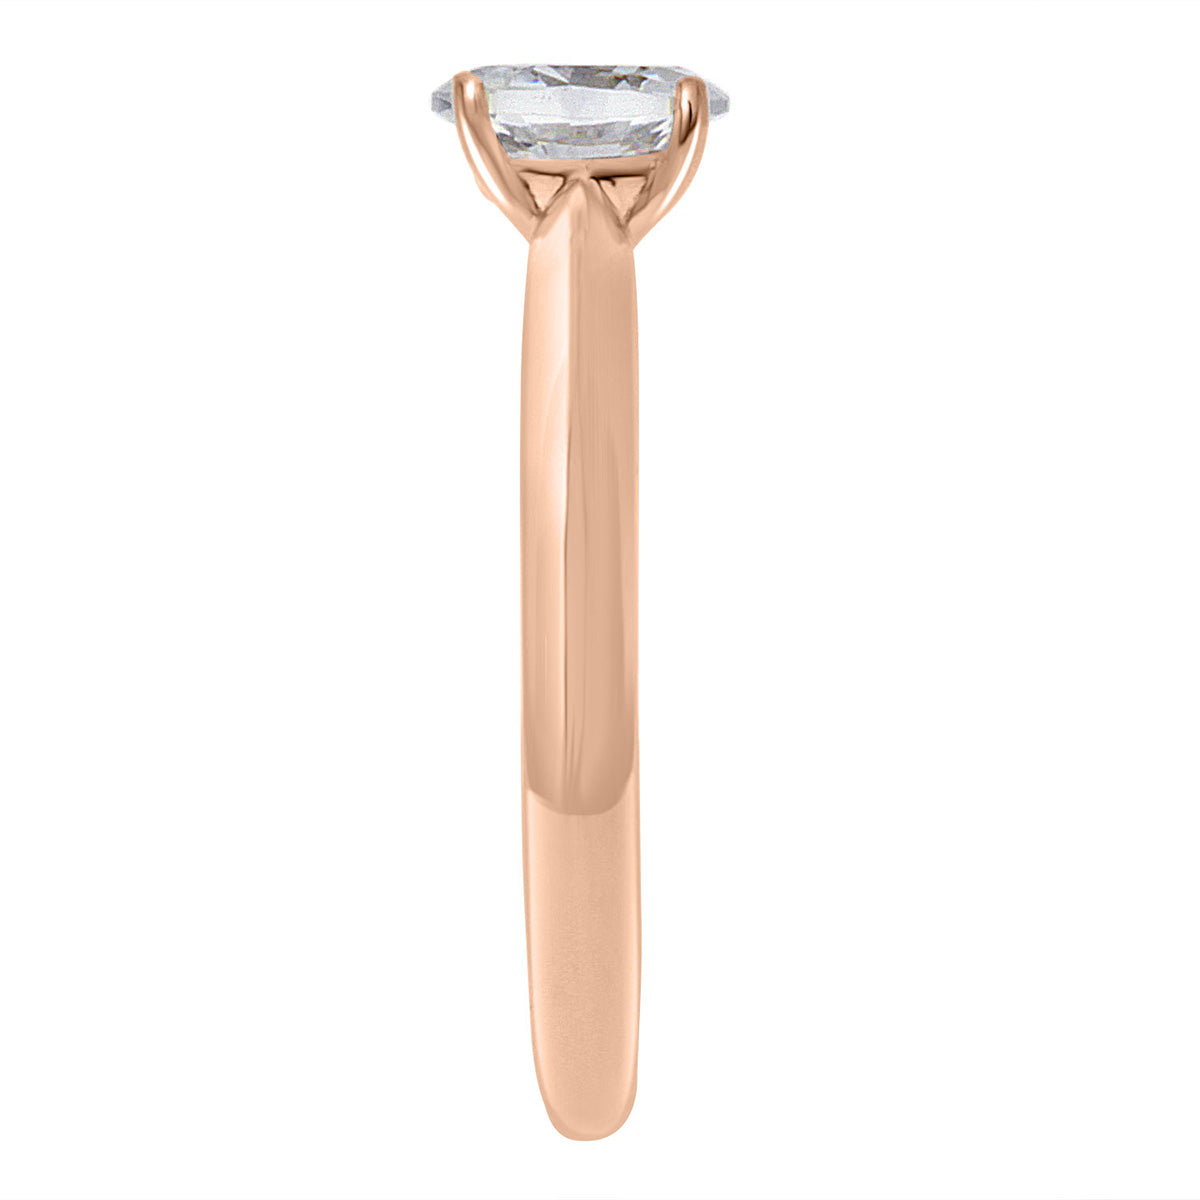 Knife Edge Band Engagement Ring in rose gold metalin a side view